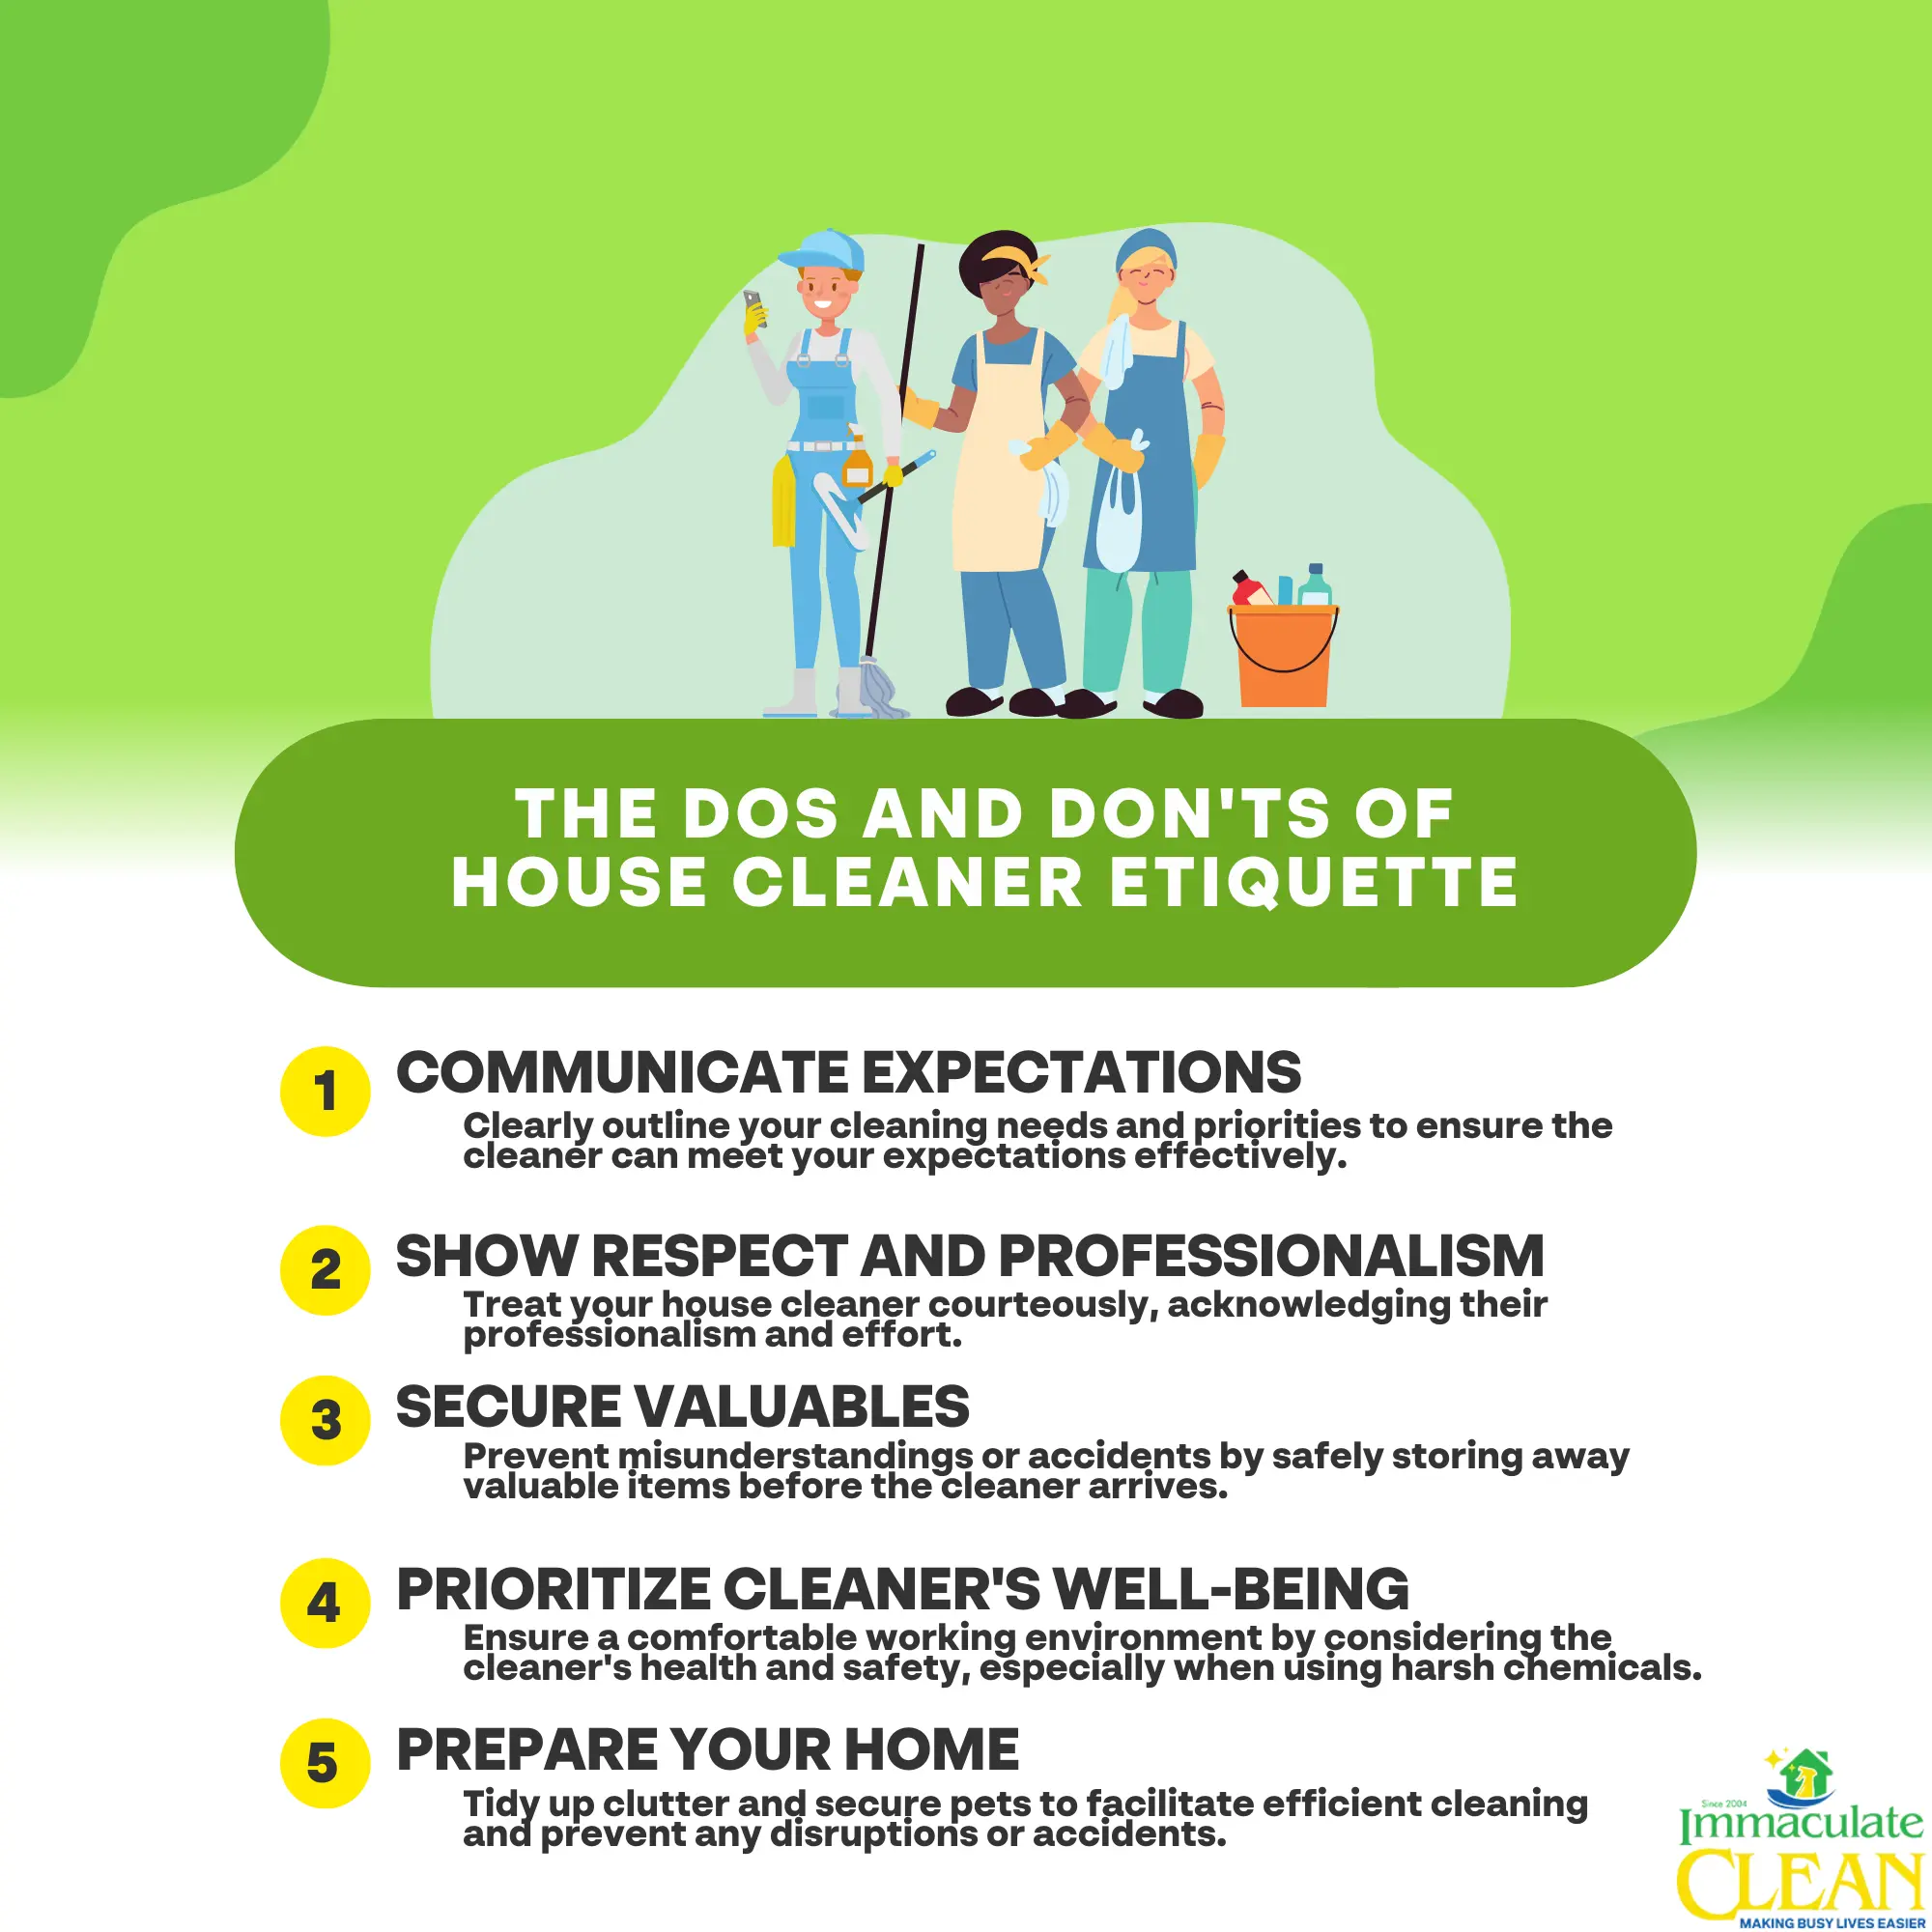 The Dos and Don'ts of House Cleaner Etiquette